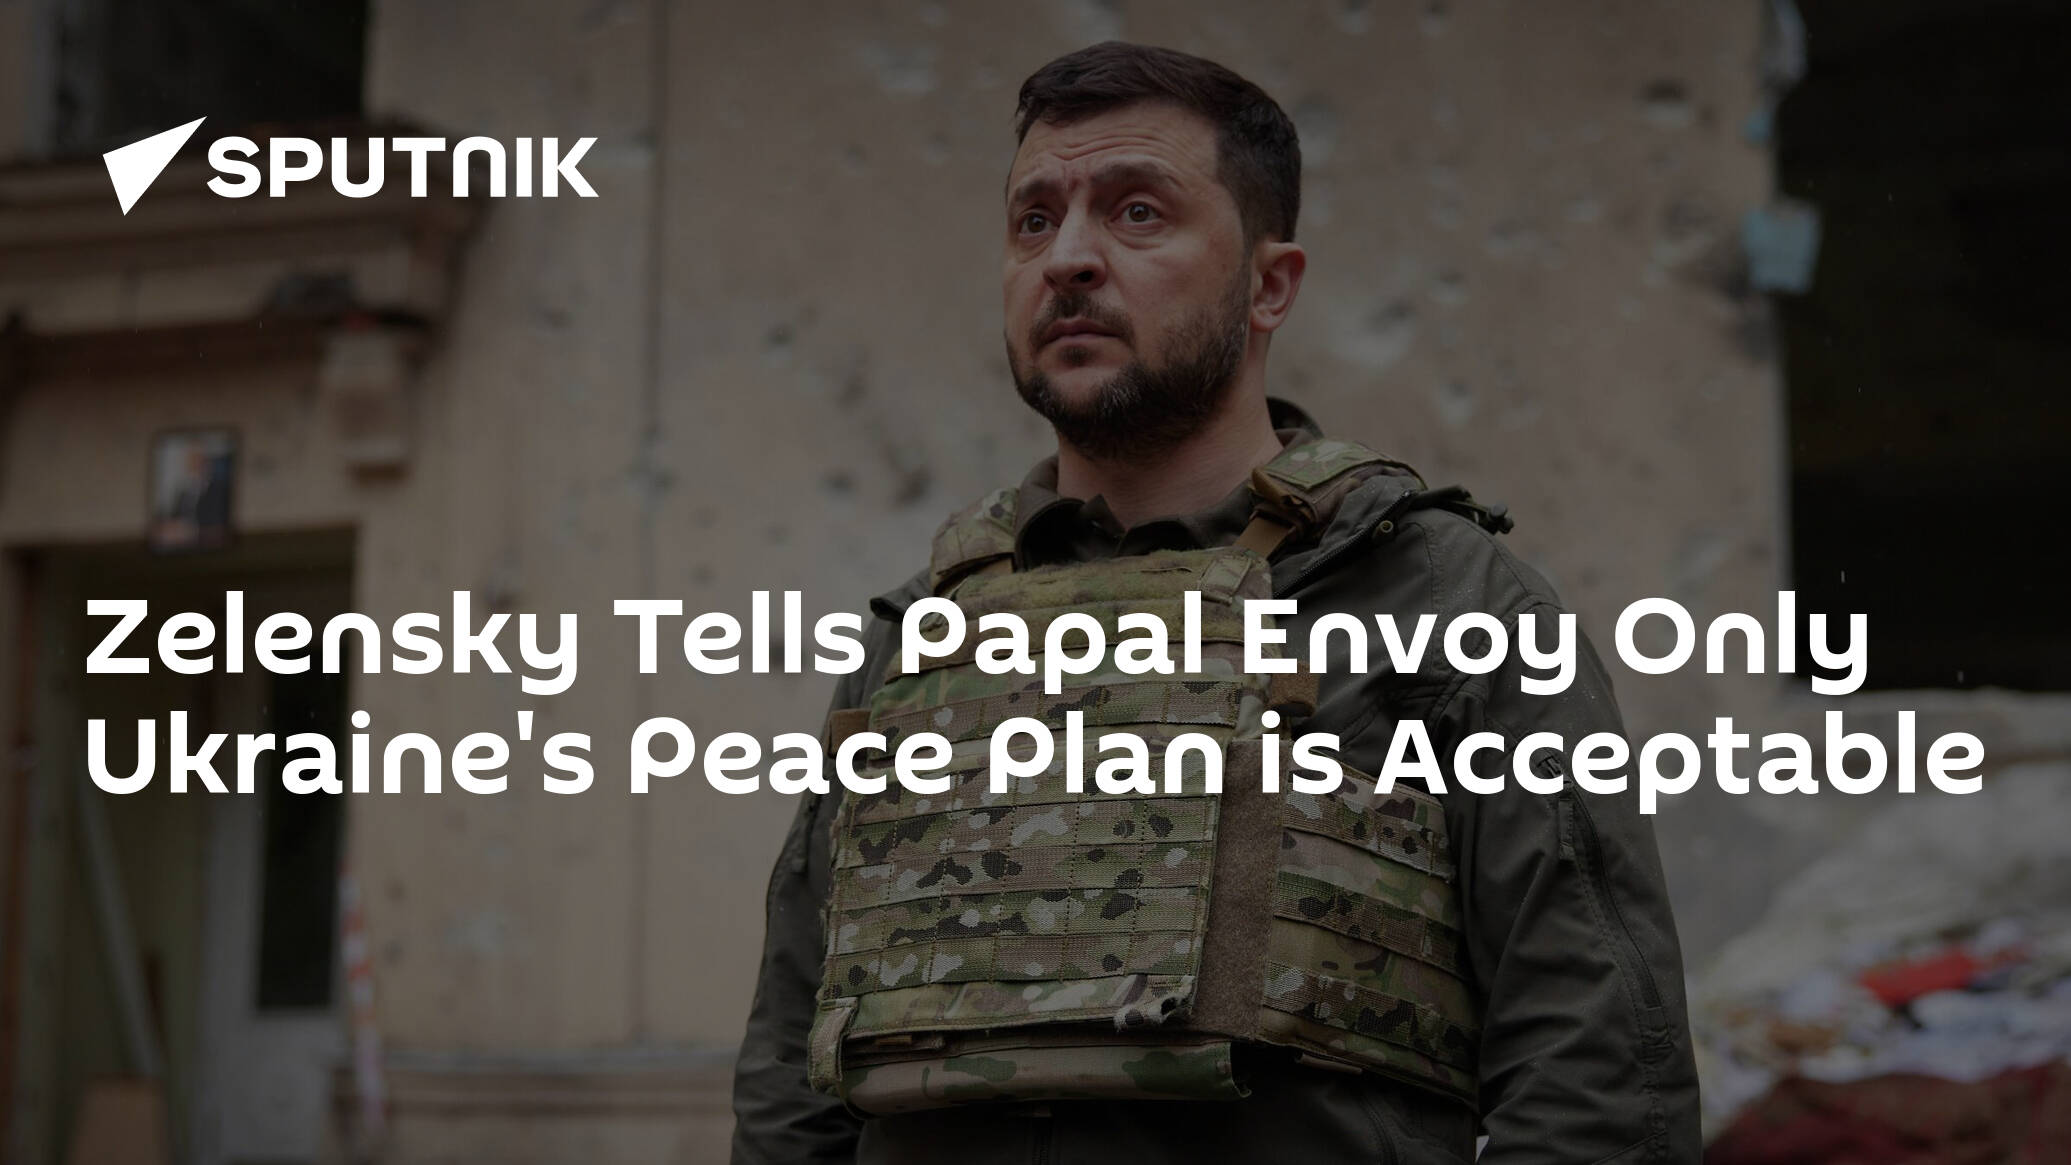 Zelensky Tells Papal Envoy Only Ukraine's Peace Plan is Acceptable